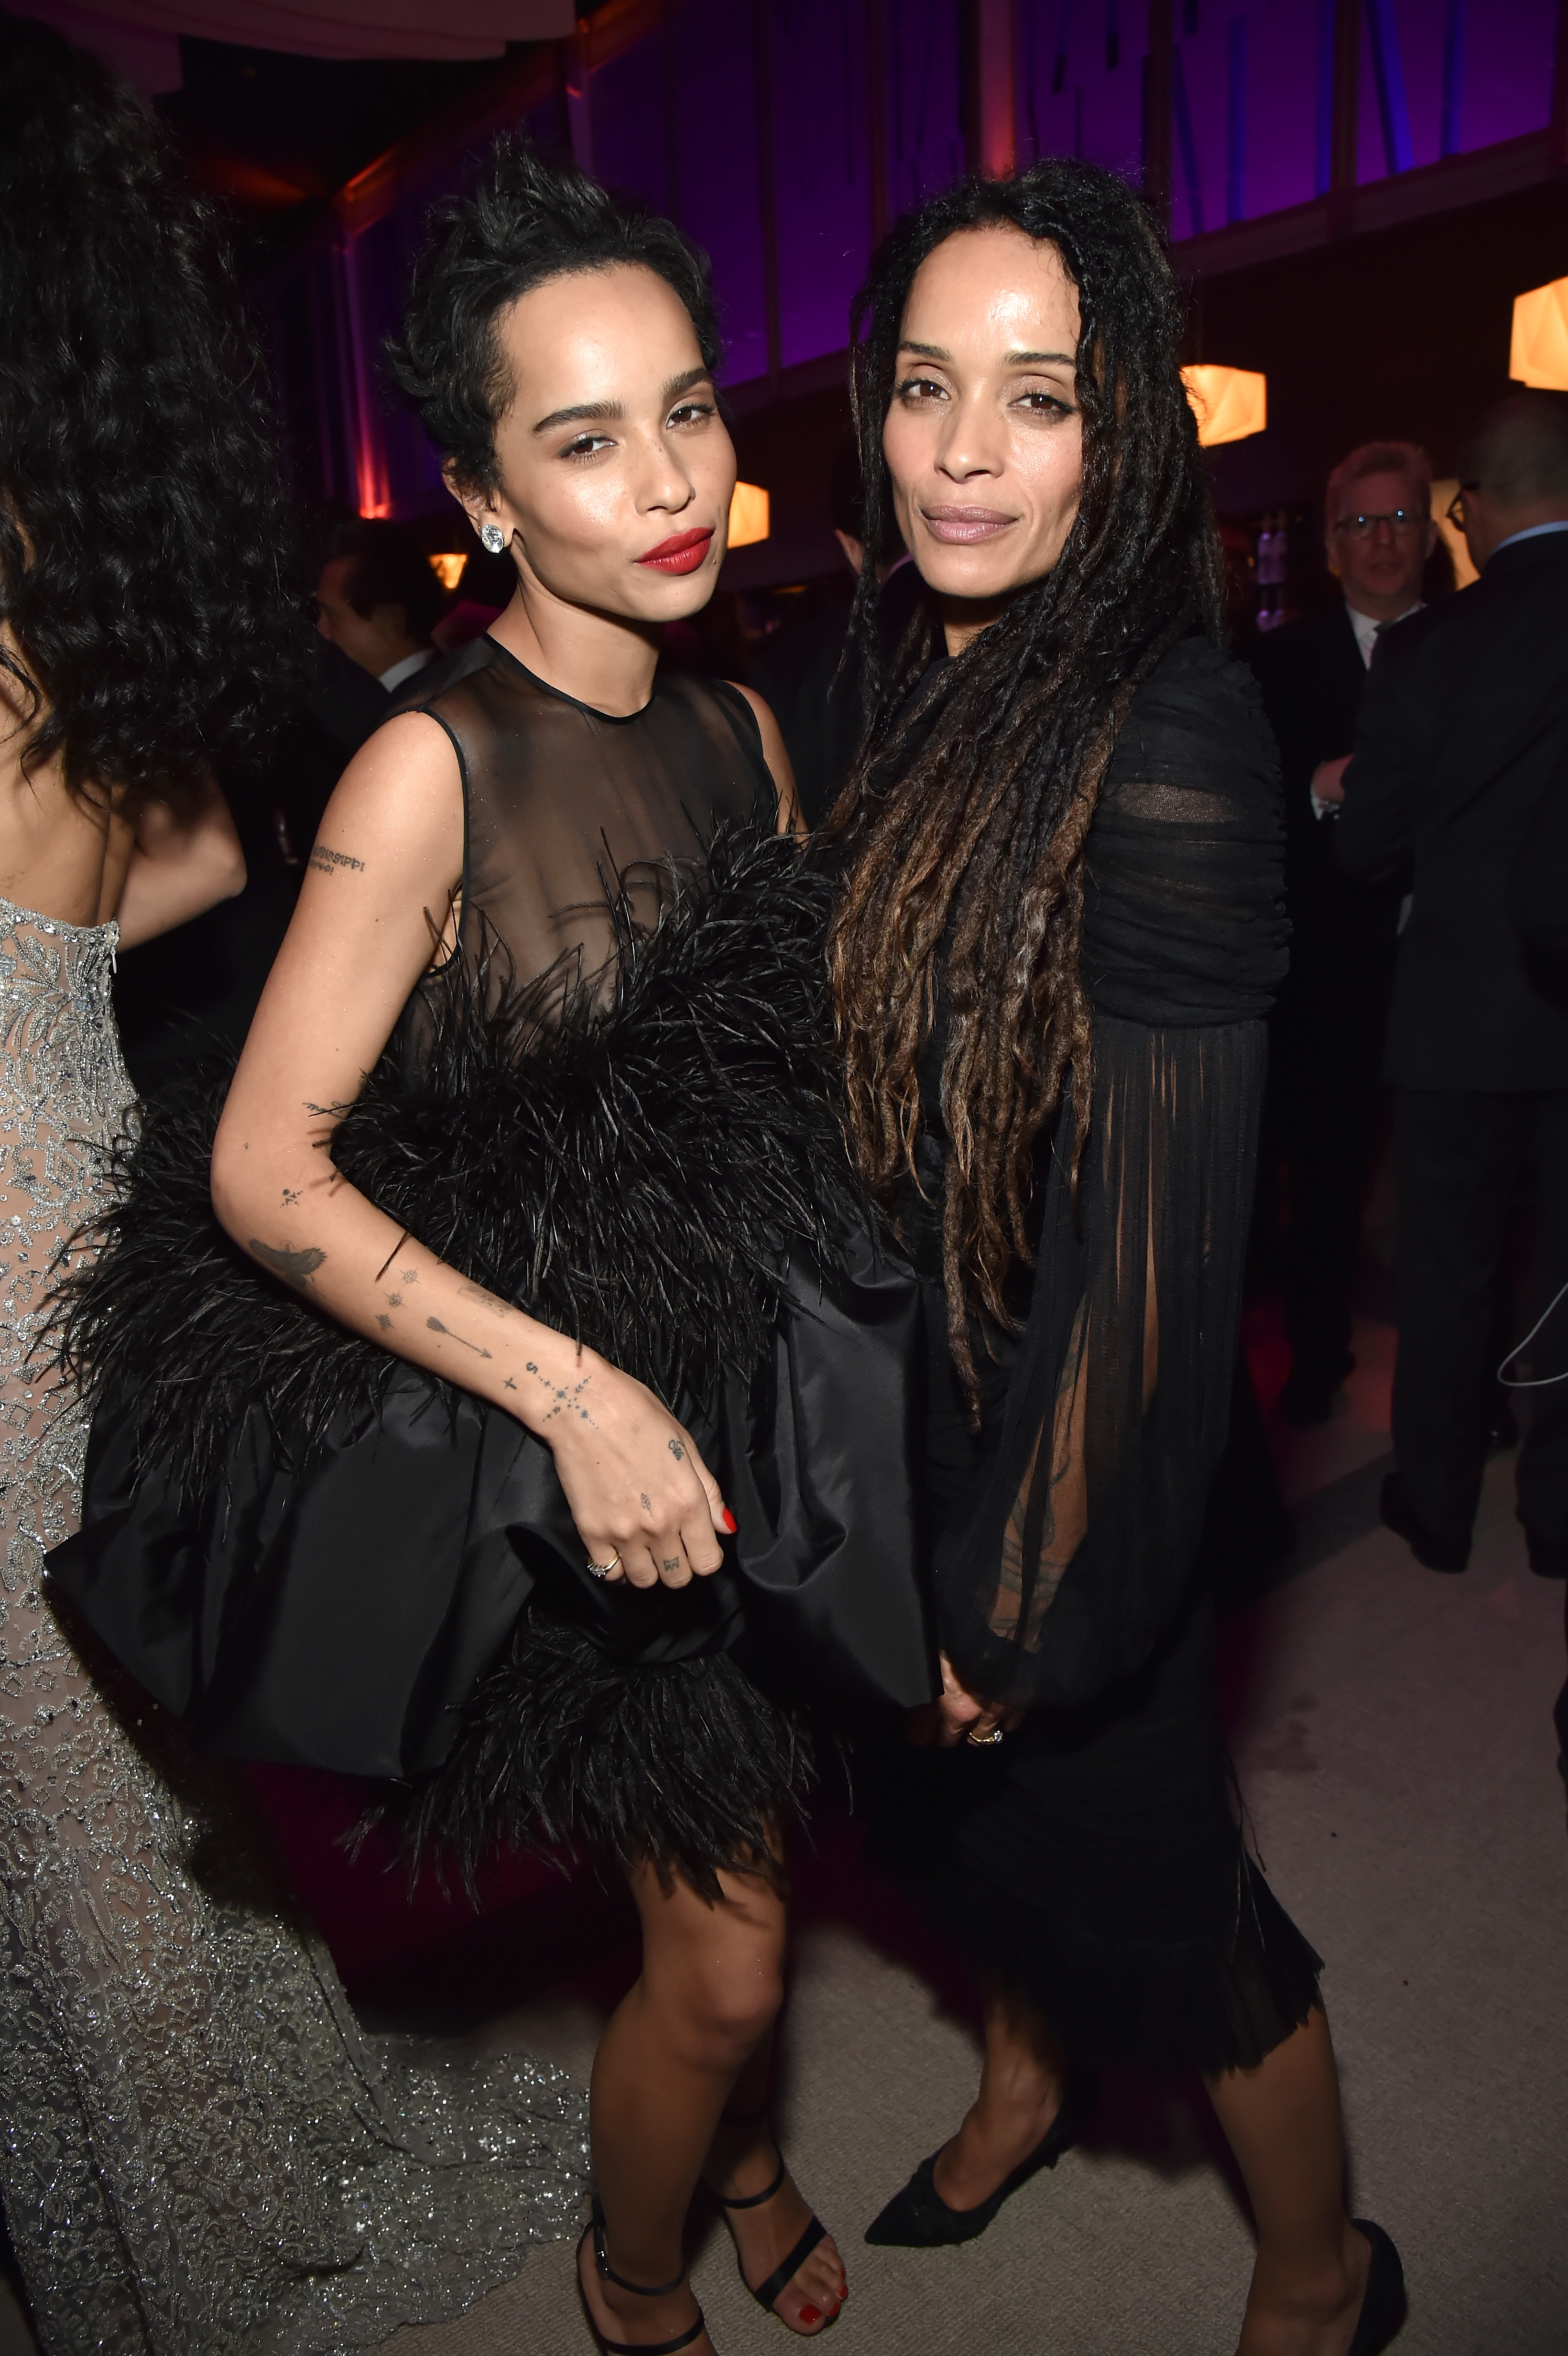 Zoe Kravitz and Lisa Bonet attend the 2018 Vanity Fair Oscar Party on March 4, 2018. (Photo by Kevin Mazur/Getty Images) (Mazur—WireImage/VF18/Getty Images)